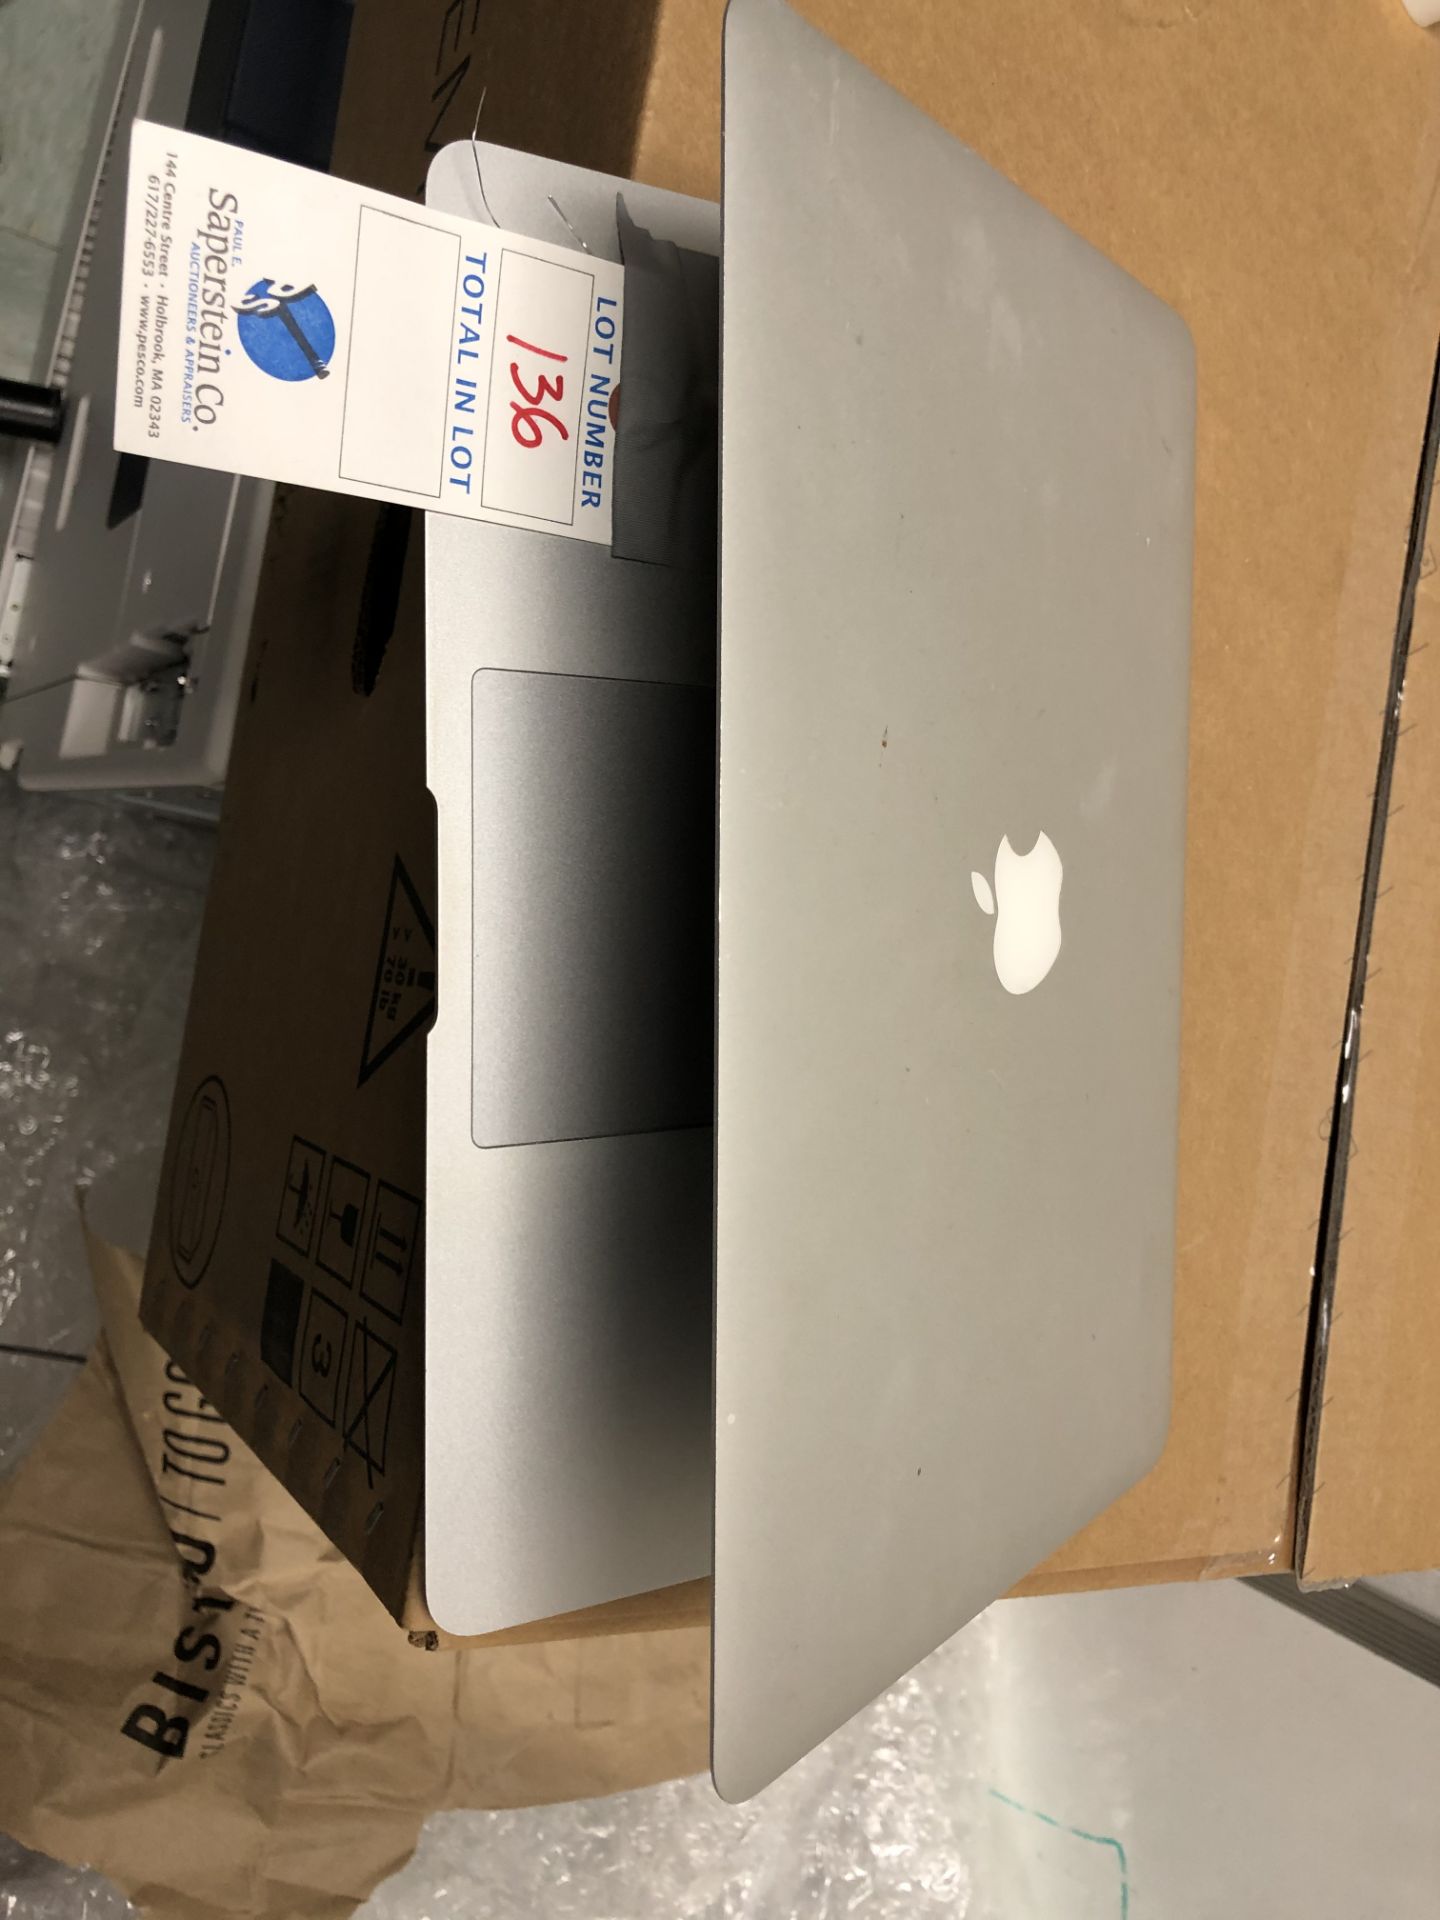 Mac Book Air #A1369 Laptop (Hard Drive Wiped) - Image 2 of 3